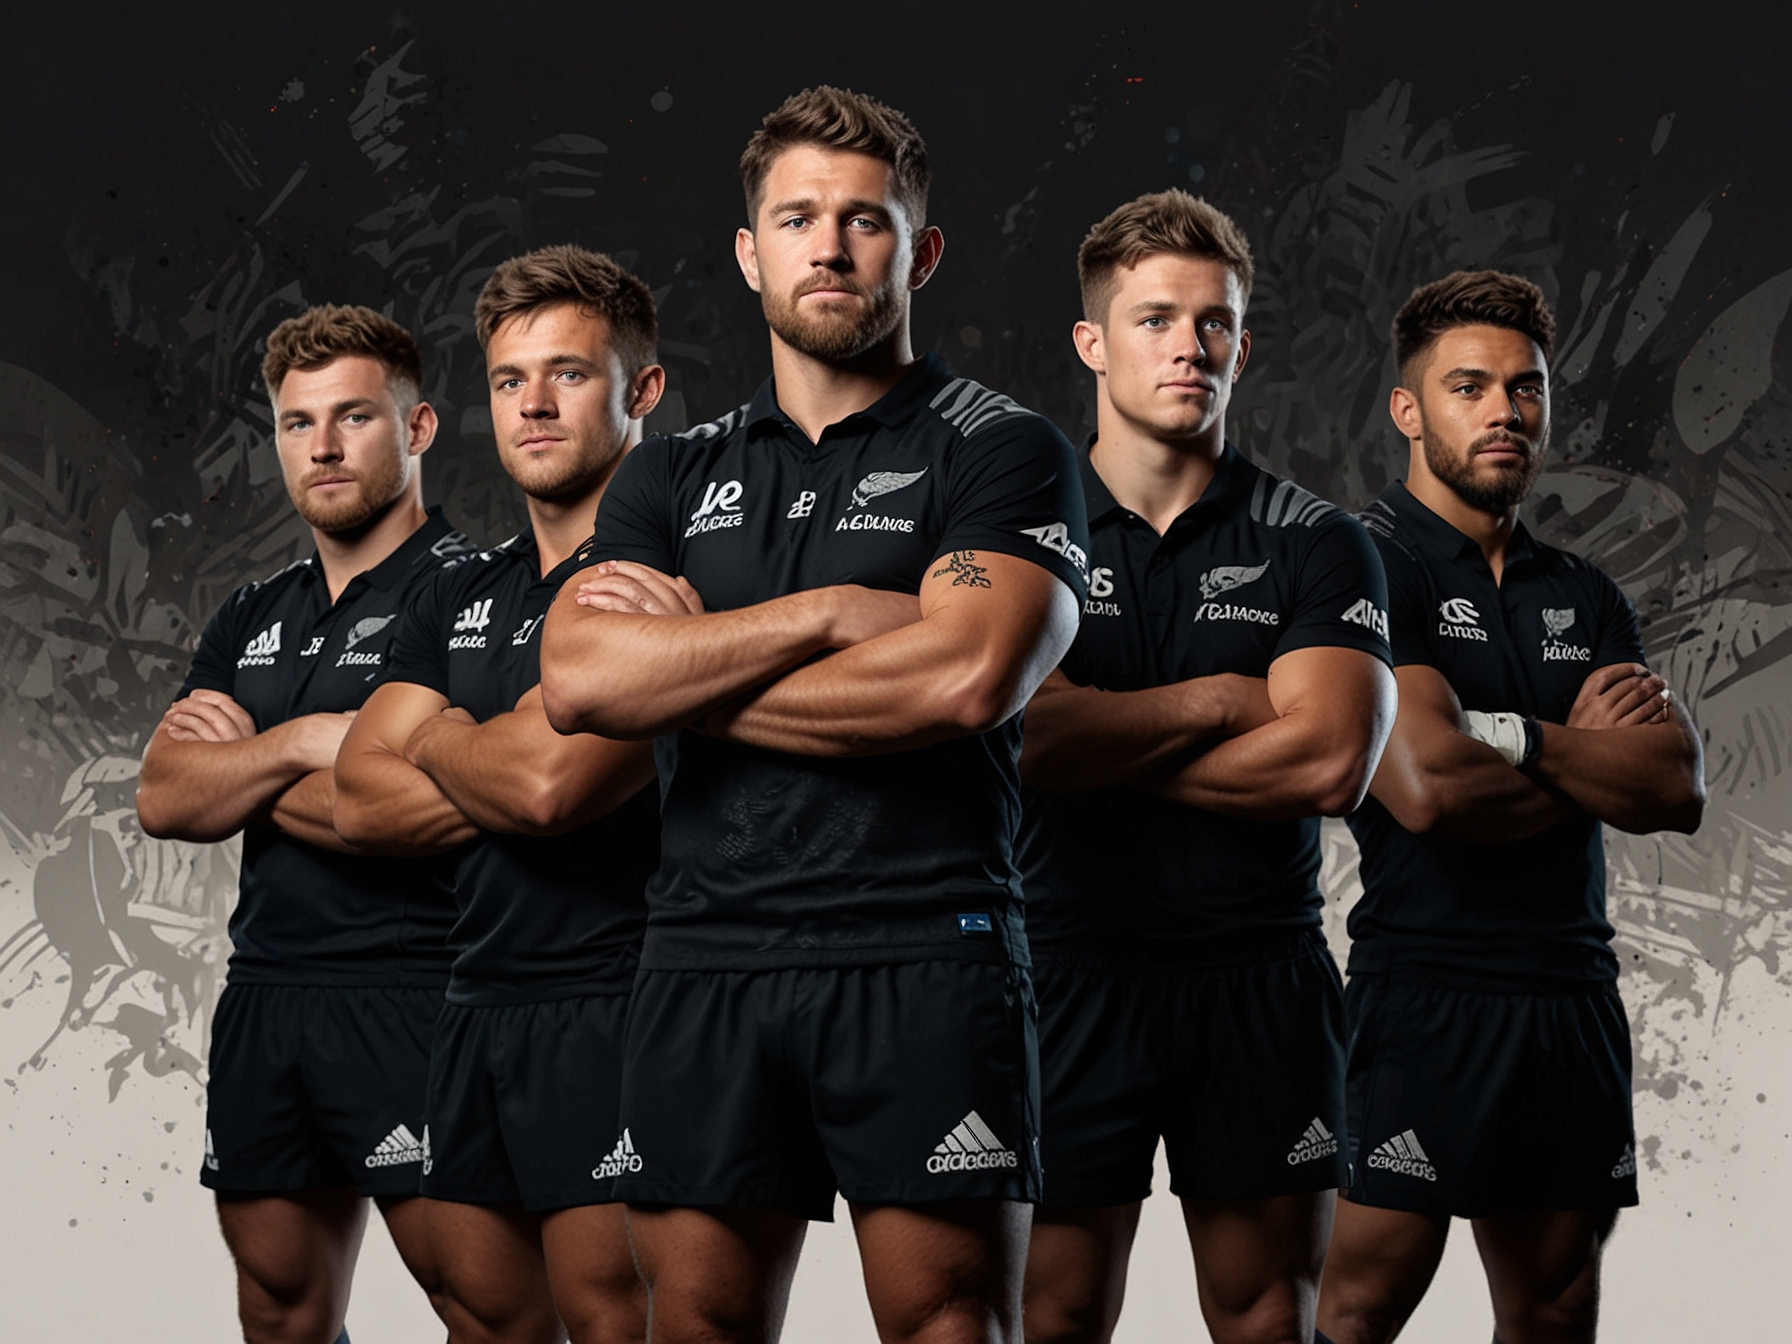 An image showing the official announcement of the All Blacks squad for the England tour of New Zealand, with head coach Ian Foster and key players like Sam Whitelock and Beauden Barrett.